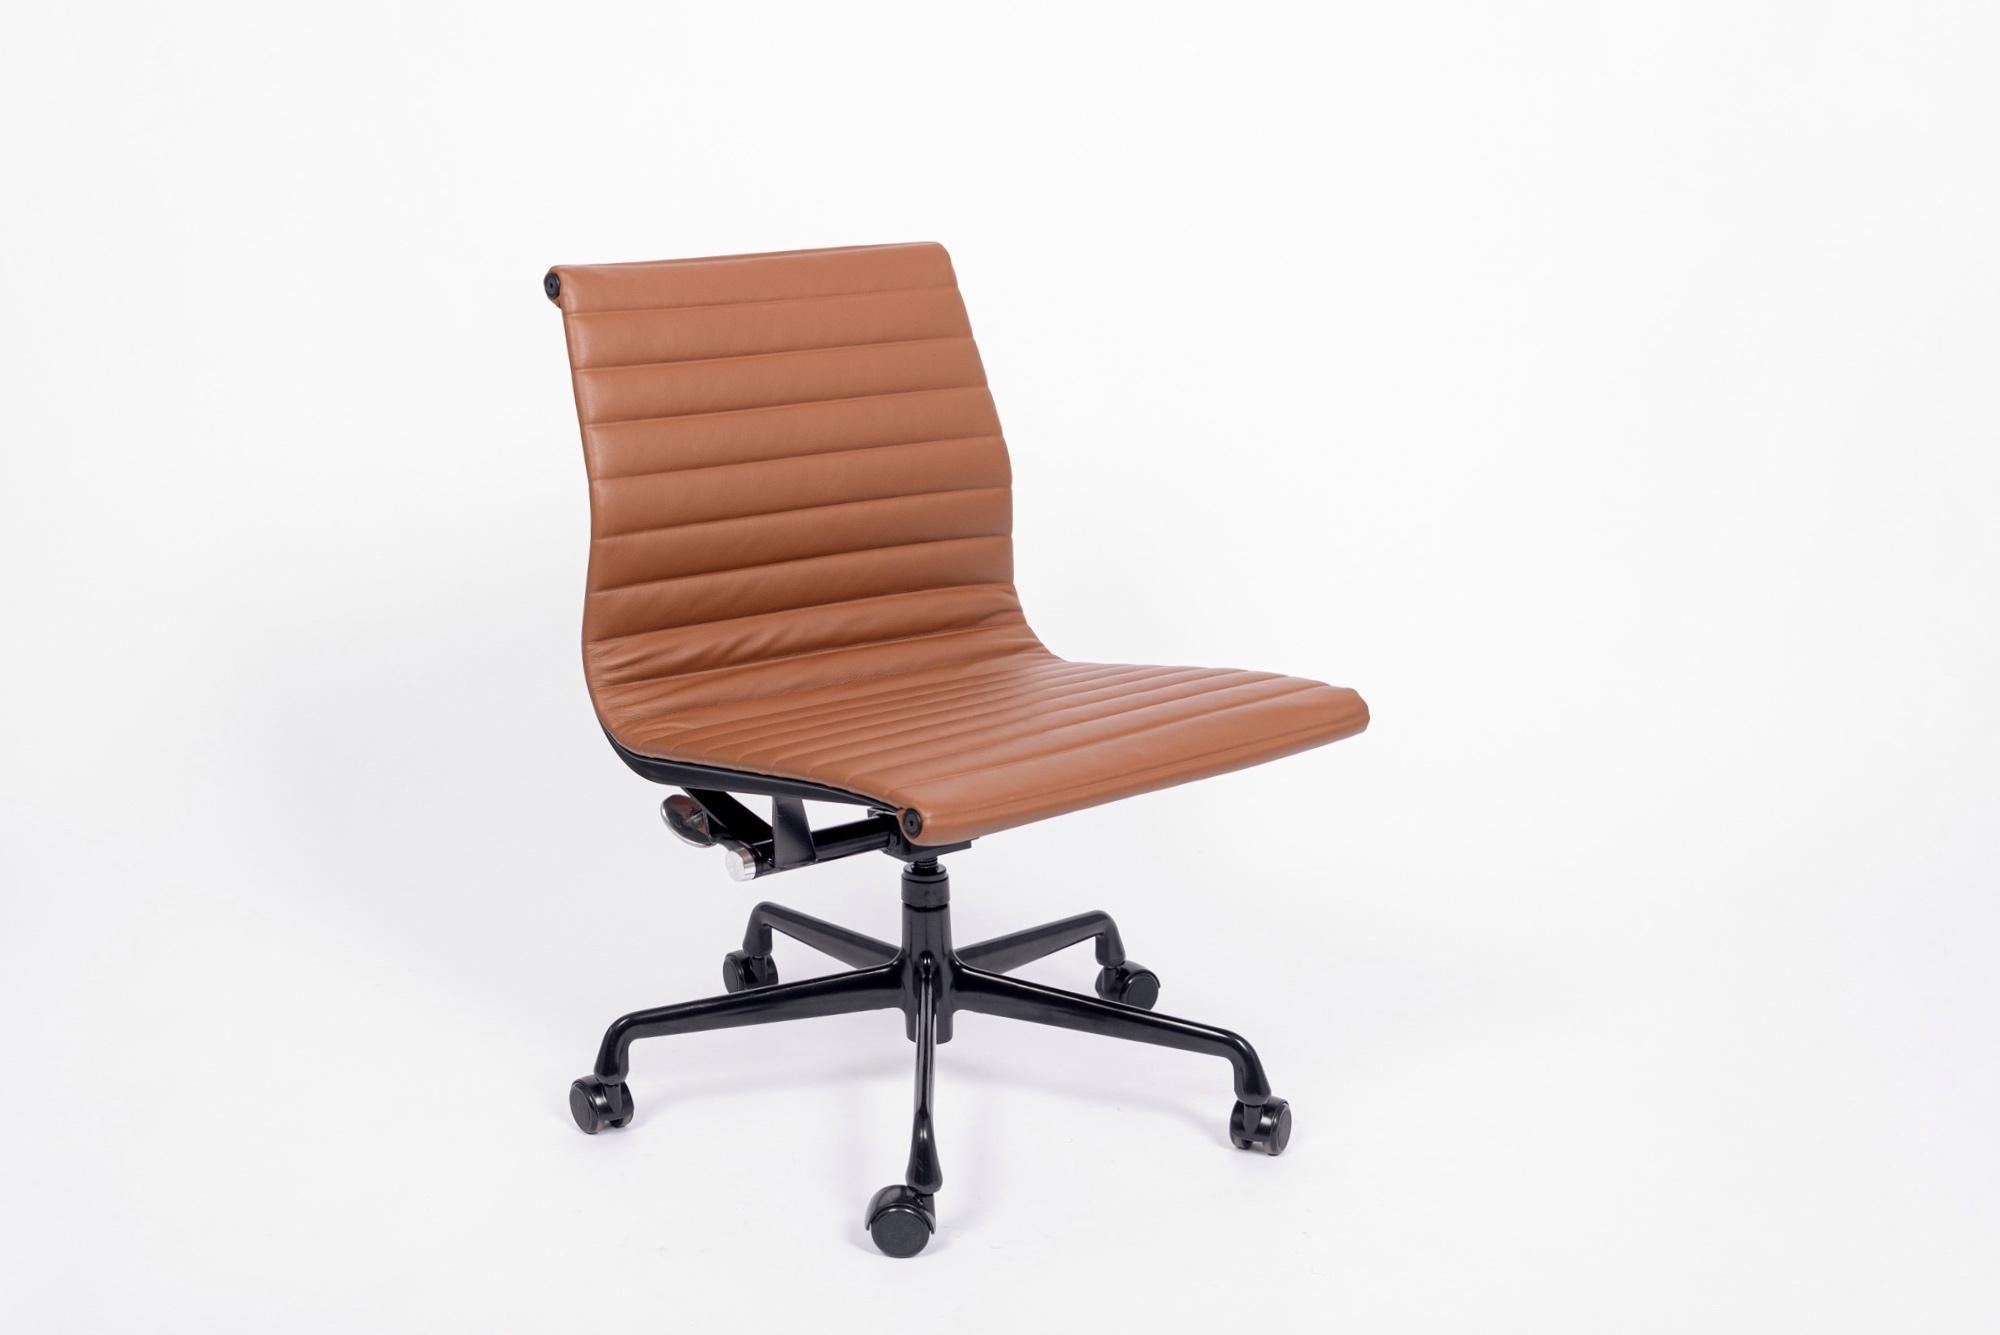 The Aluminum Group Management side office chair designed by Charles & Ray Eames for Herman Miller is from the Eames Aluminum Group Collection. These distinctive chairs resulted from the Eames's experimentation with aluminum, which became more